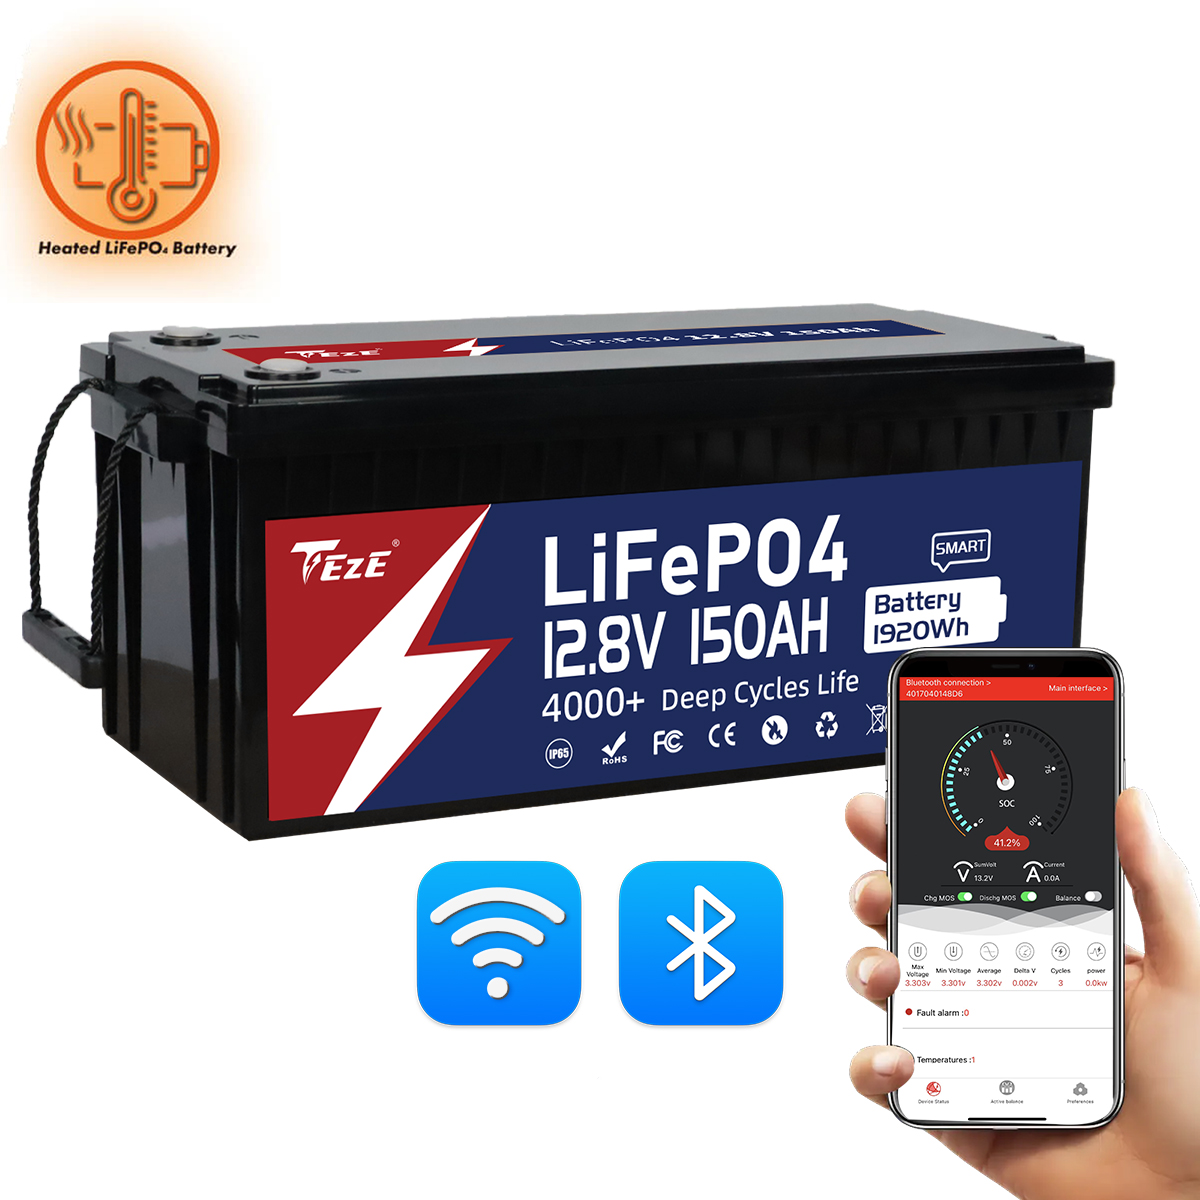 New Add WiFi-TezePower 12V 150Ah LiFePO4 Battery with WIFI and Bluetooth, Self-heating and Active Balancer, Built-in 150A Daly BMS(WIFI Built-in Version)